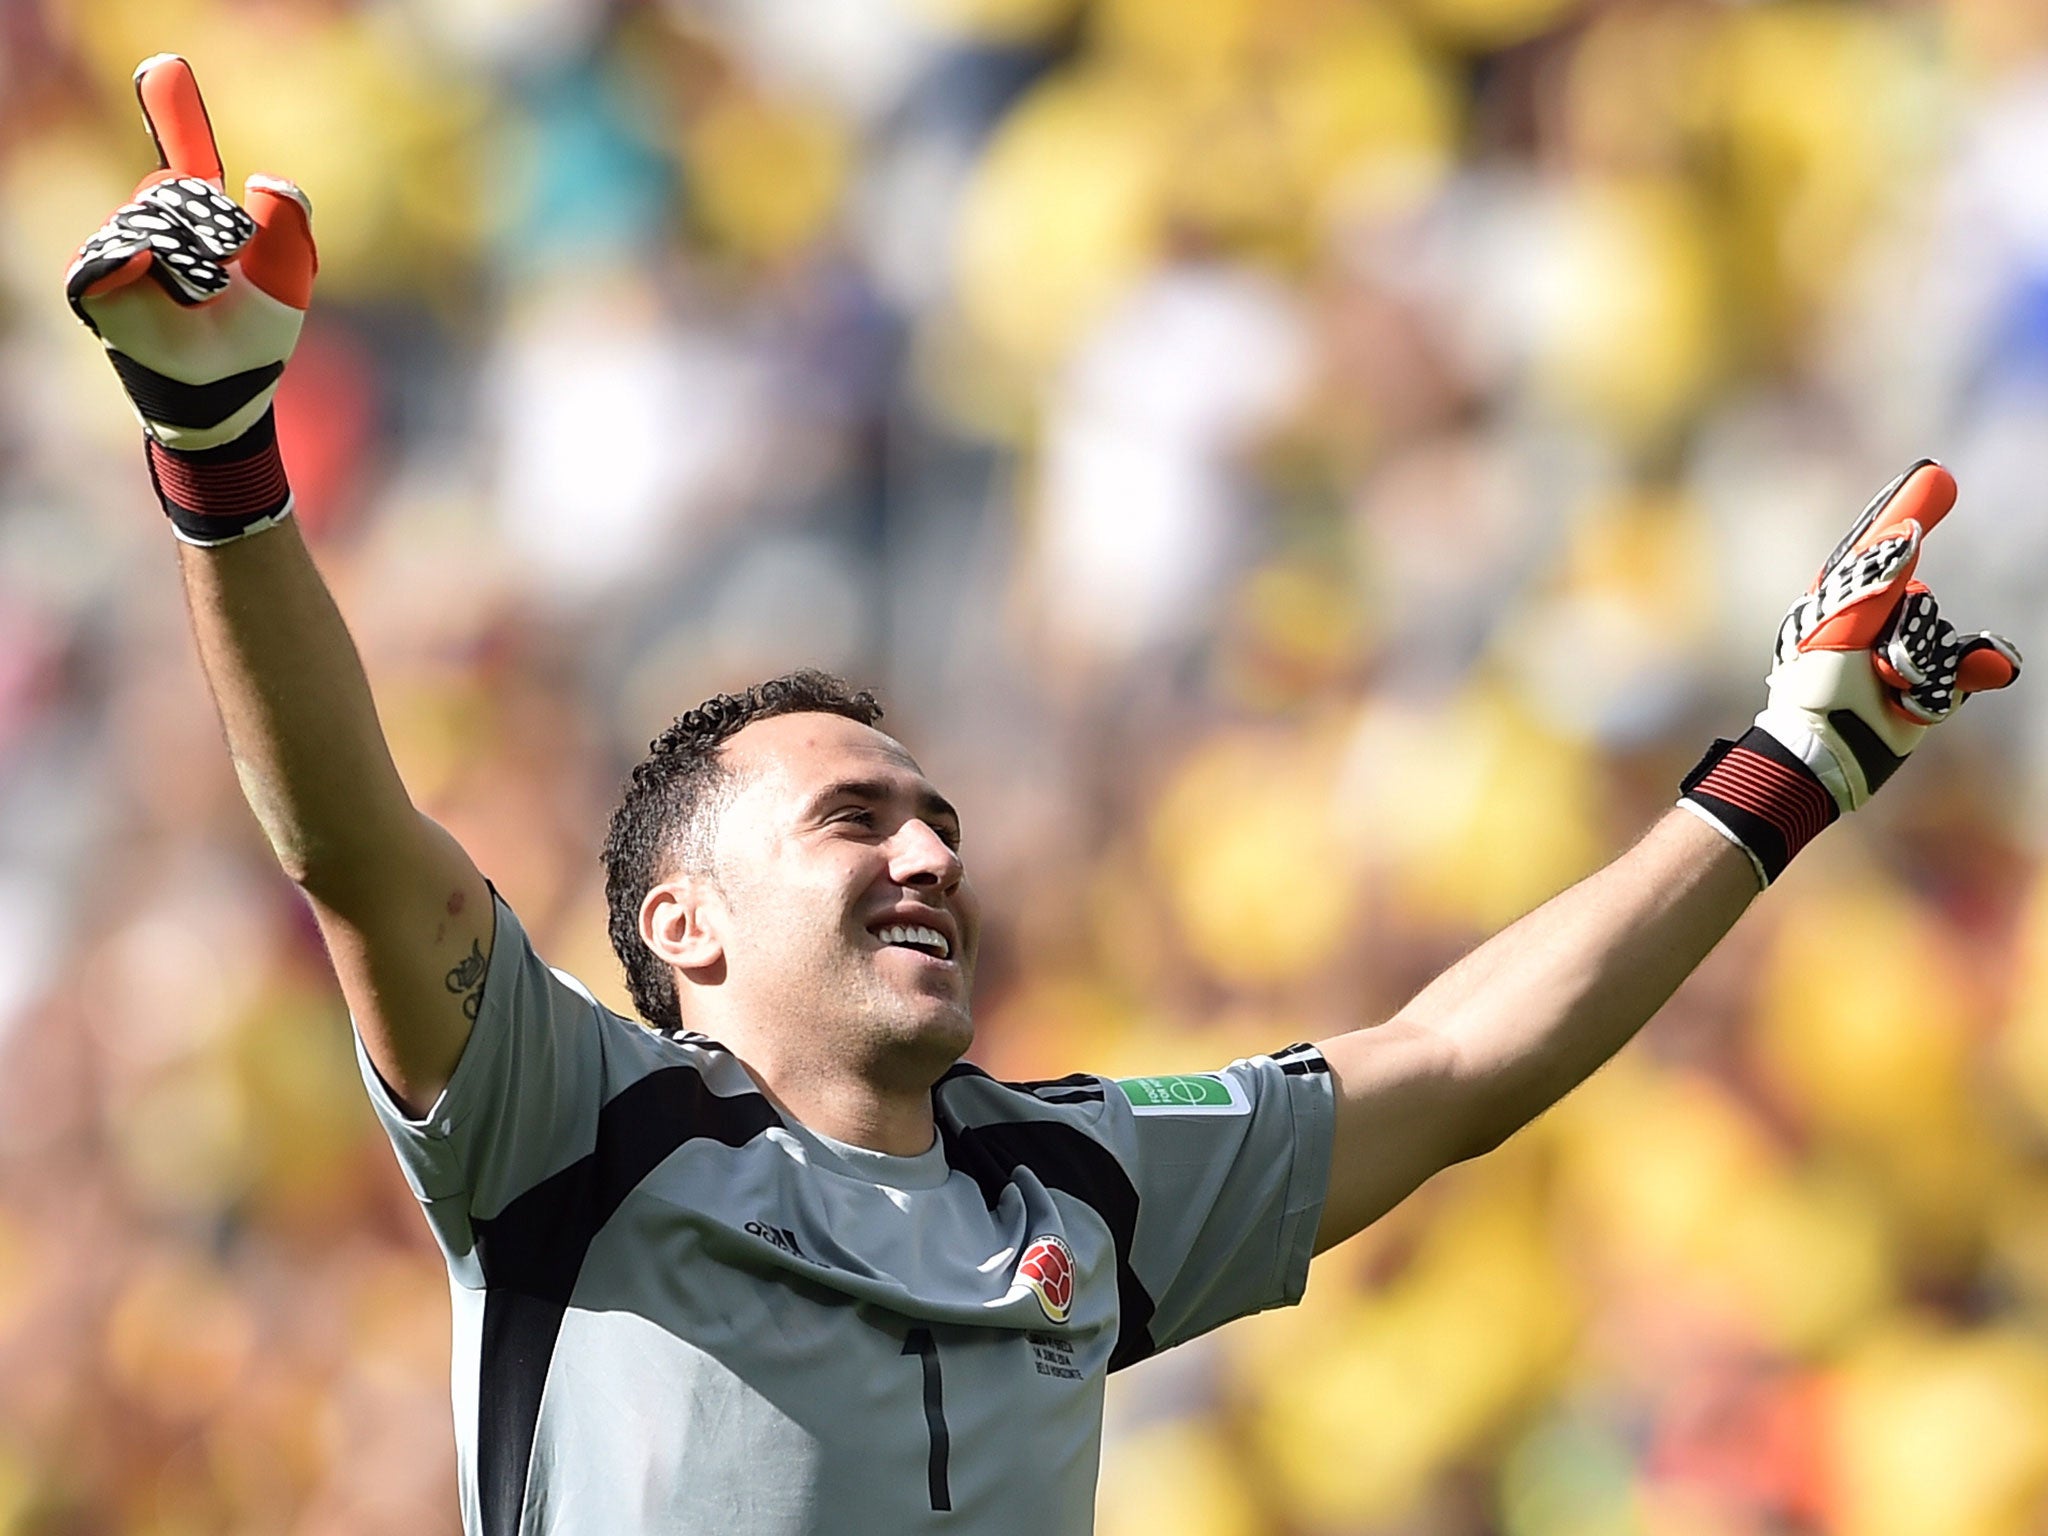 Ospina celebrates during the game